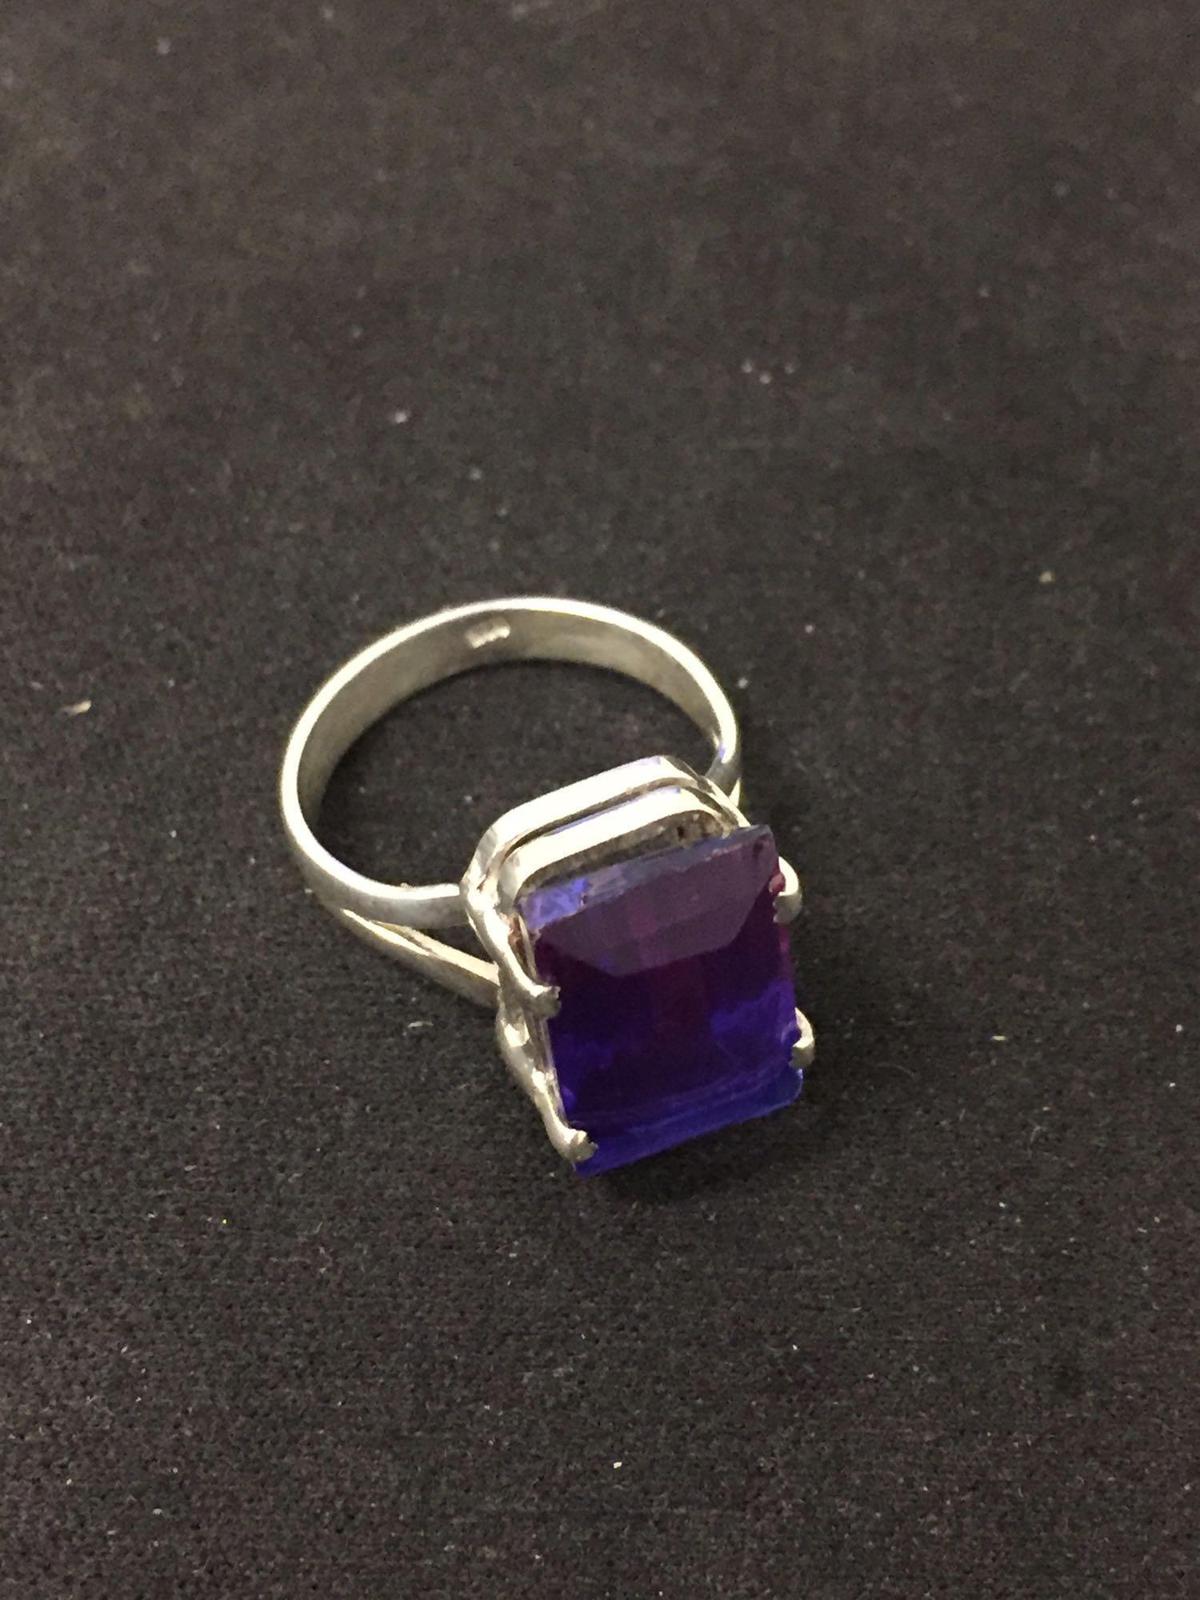 New! Beautiful Bi-Color Purple & Violet Faceted Gem Sterling Silver Ring Band-Size 6.25 SRP $ 39